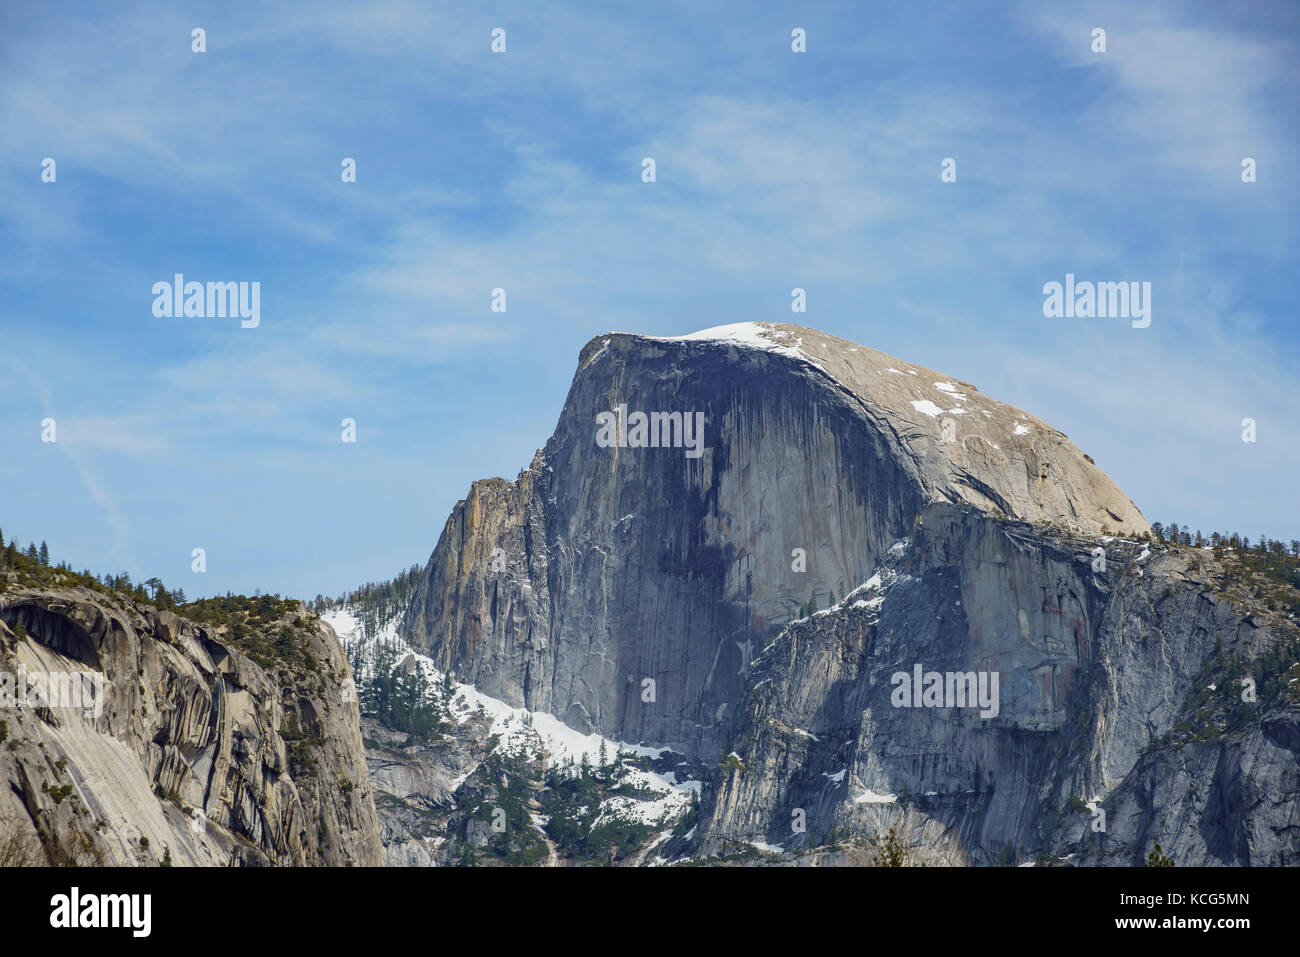 Afternoon view of the Yosemite nature scene - Half Dome at Yosemite National Park, California, United States Stock Photo